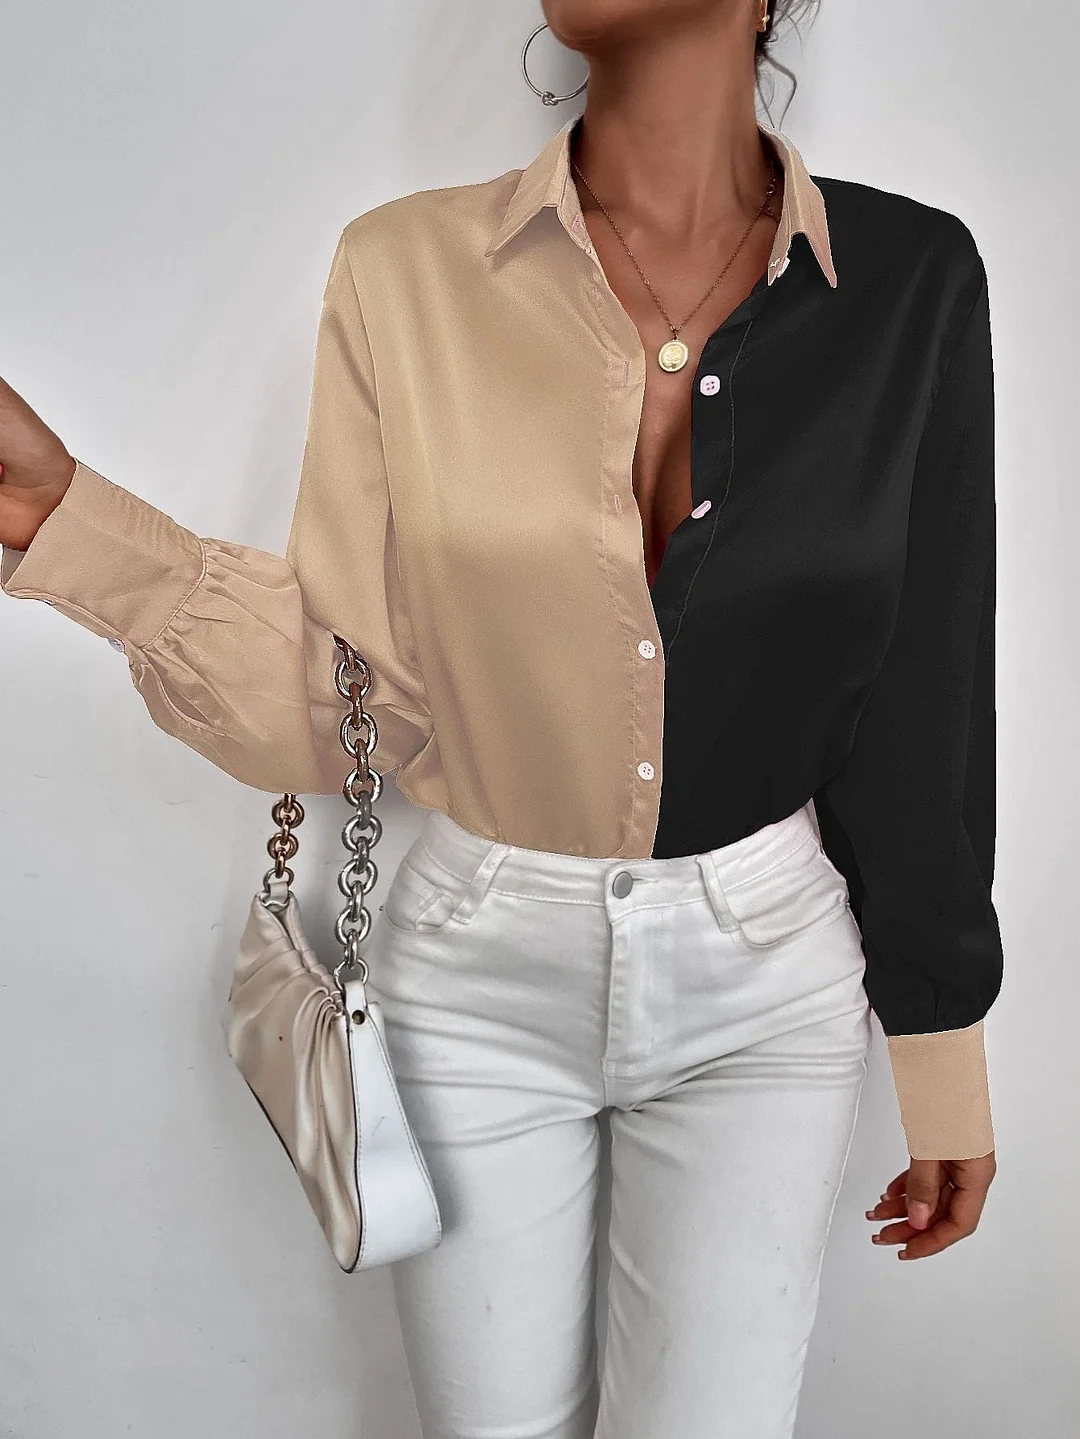 Loose Casual Top Button Up Office Ladies Shirt Blouse 